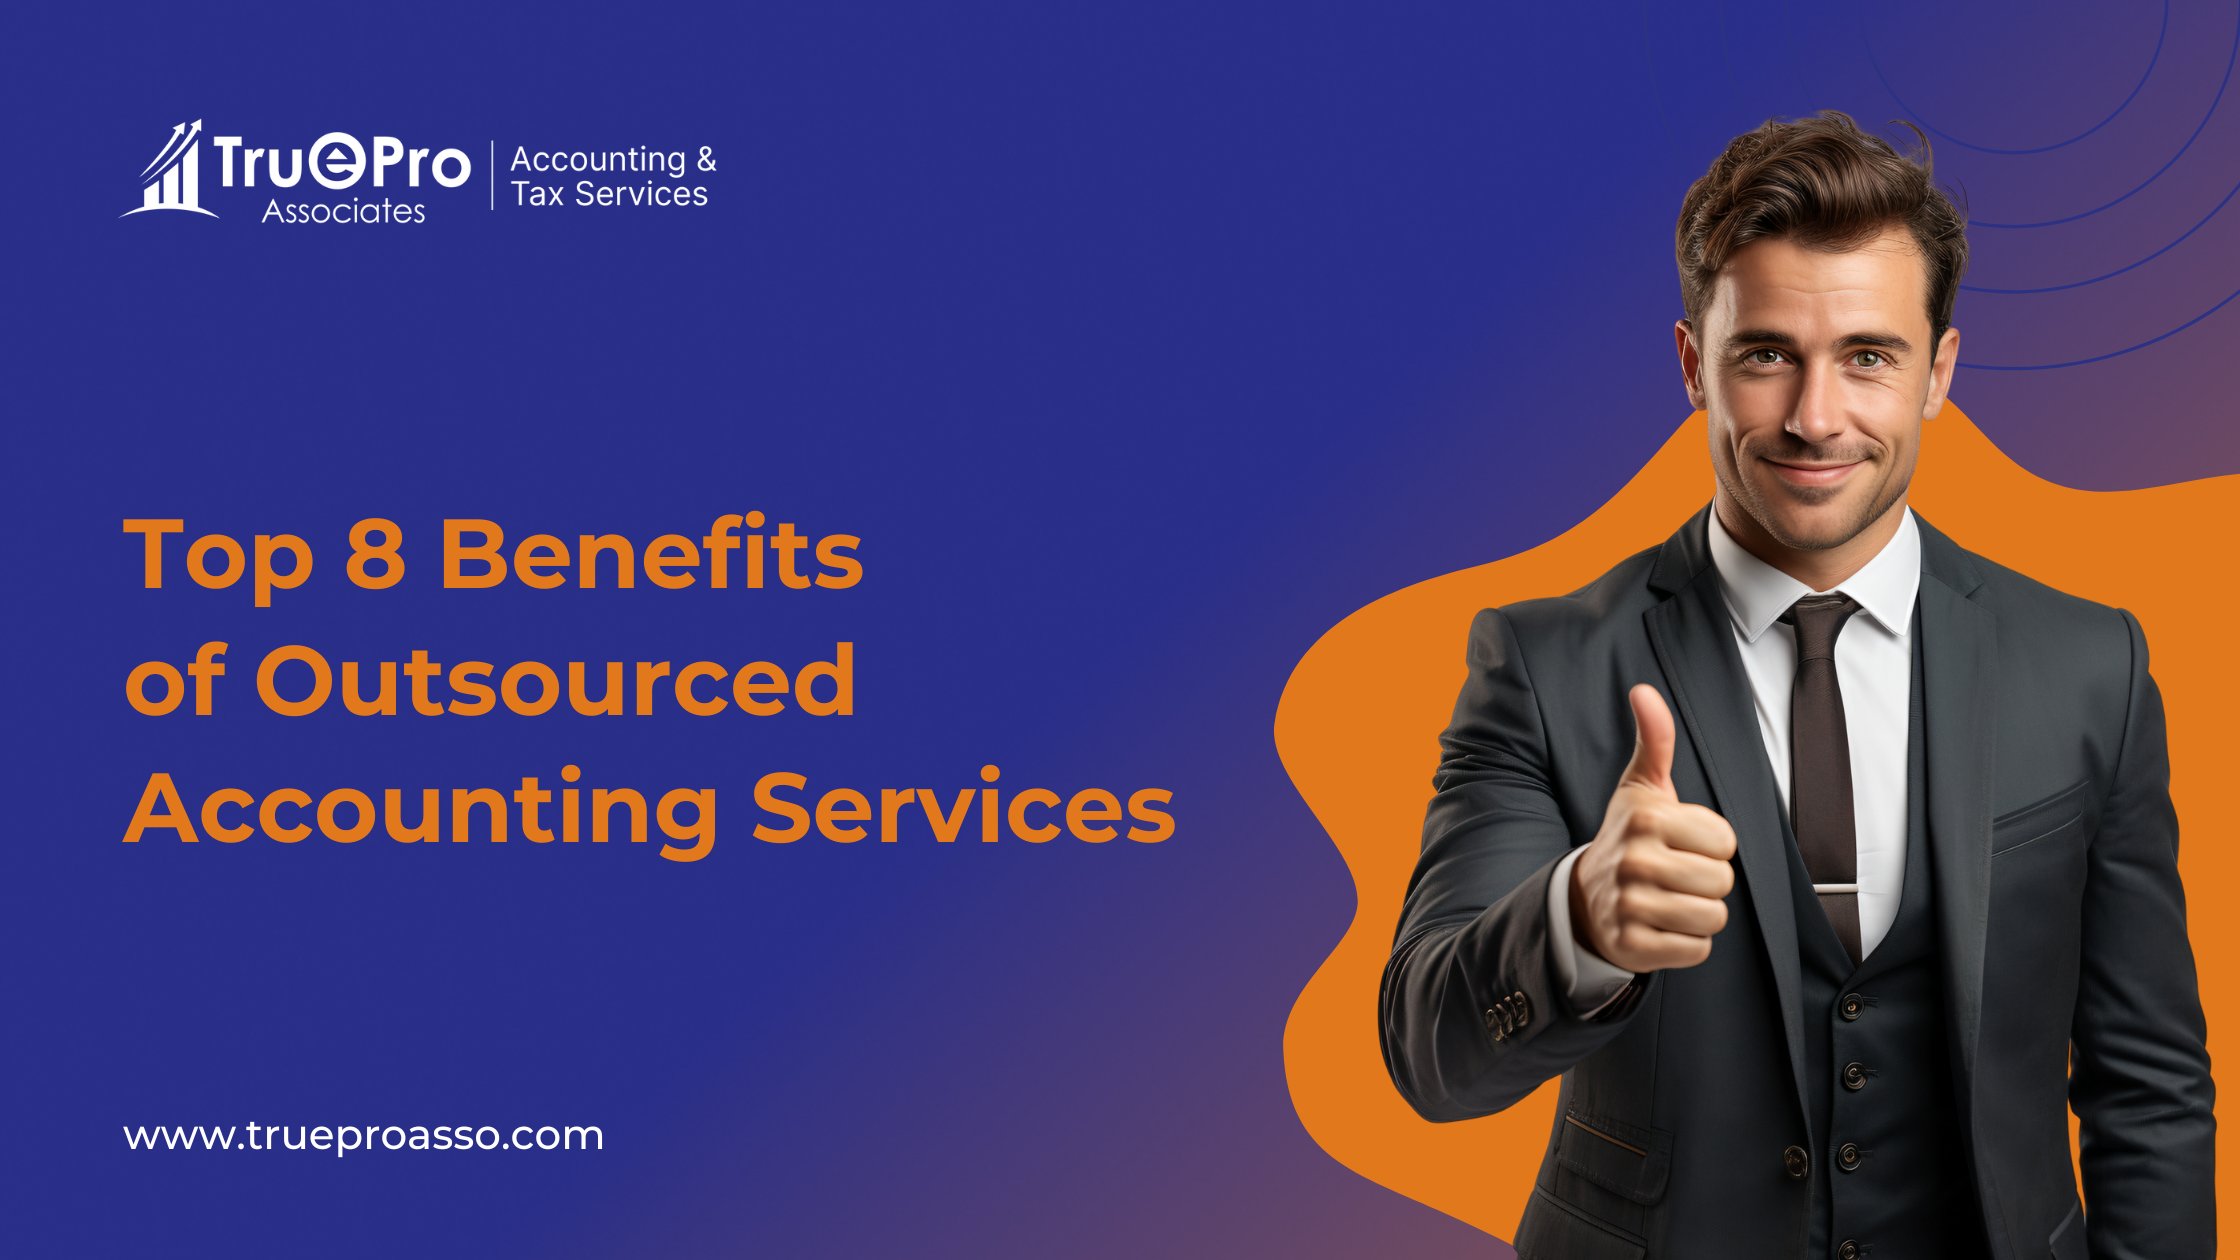 Top 8 Benefits of Outsourced Accounting Services